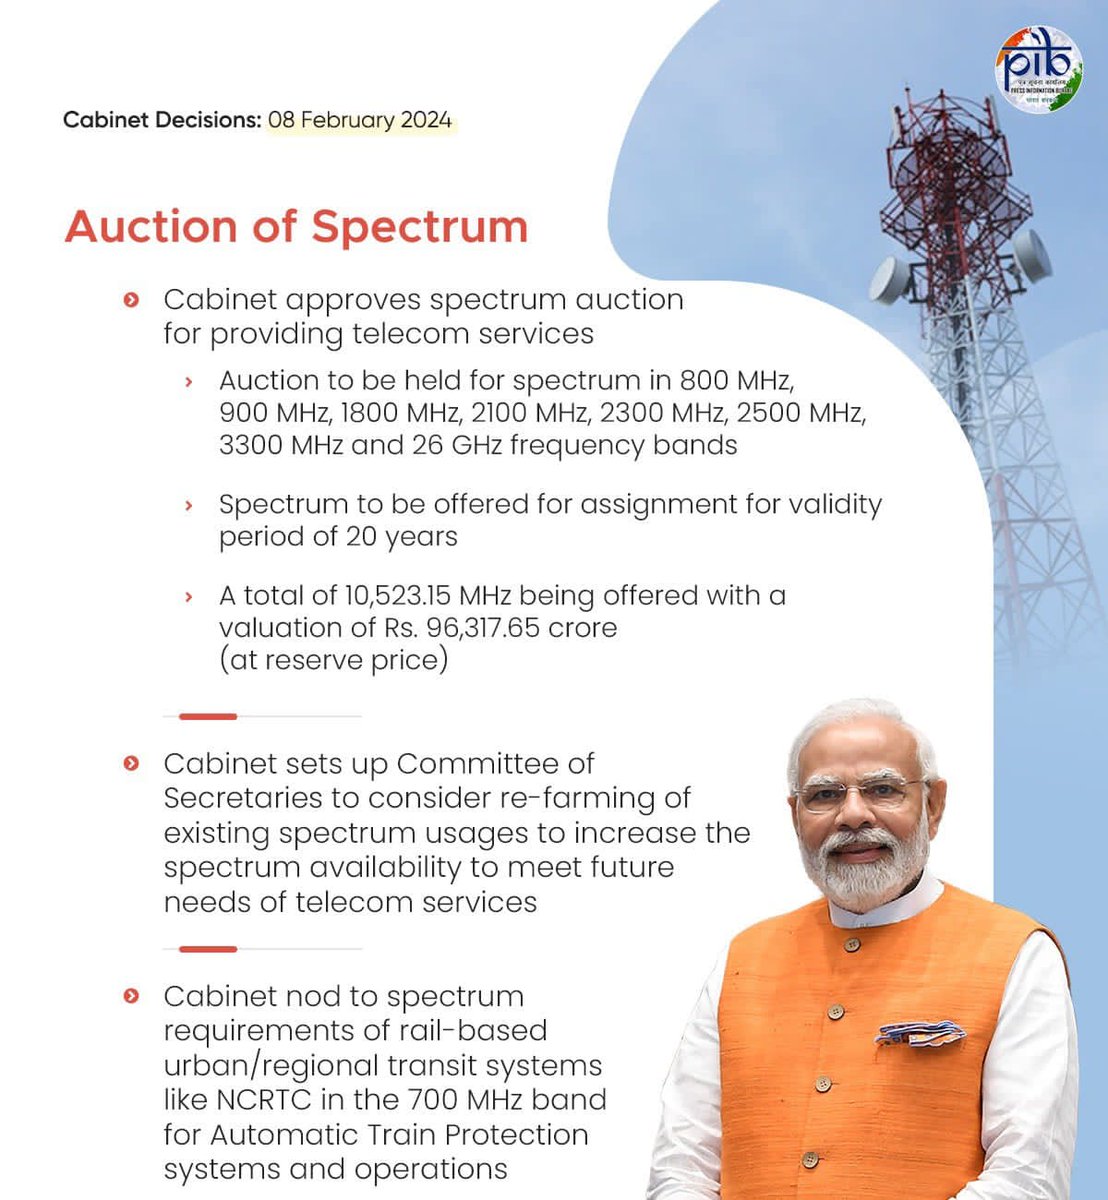 Under the chairmanship of Hon'ble PM Shri @narendramodi ji, Union Cabinet approves proposal to conduct #SpectrumAuction for providing telecom services. 

#CabinetDecisions